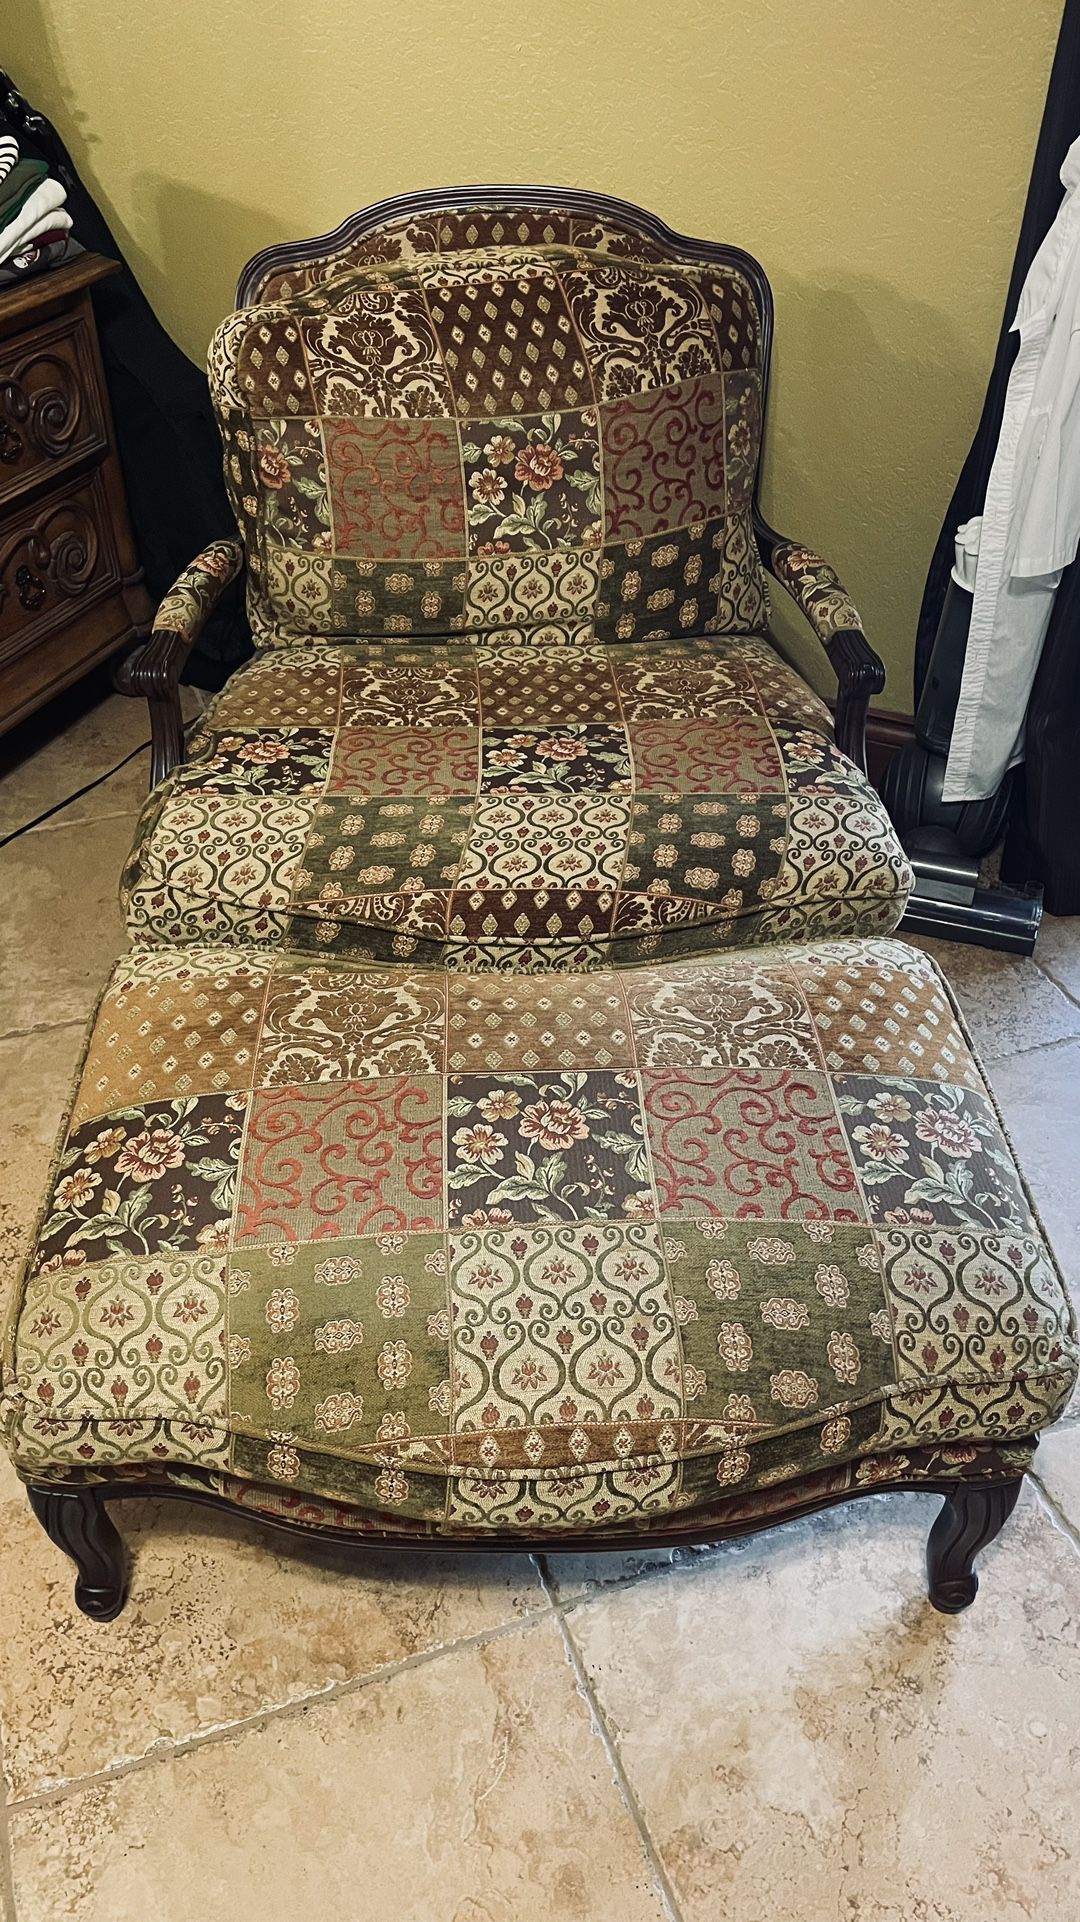 Antique sofa with ottoman $200.00 CASH, TEXT FOR PRICES. 